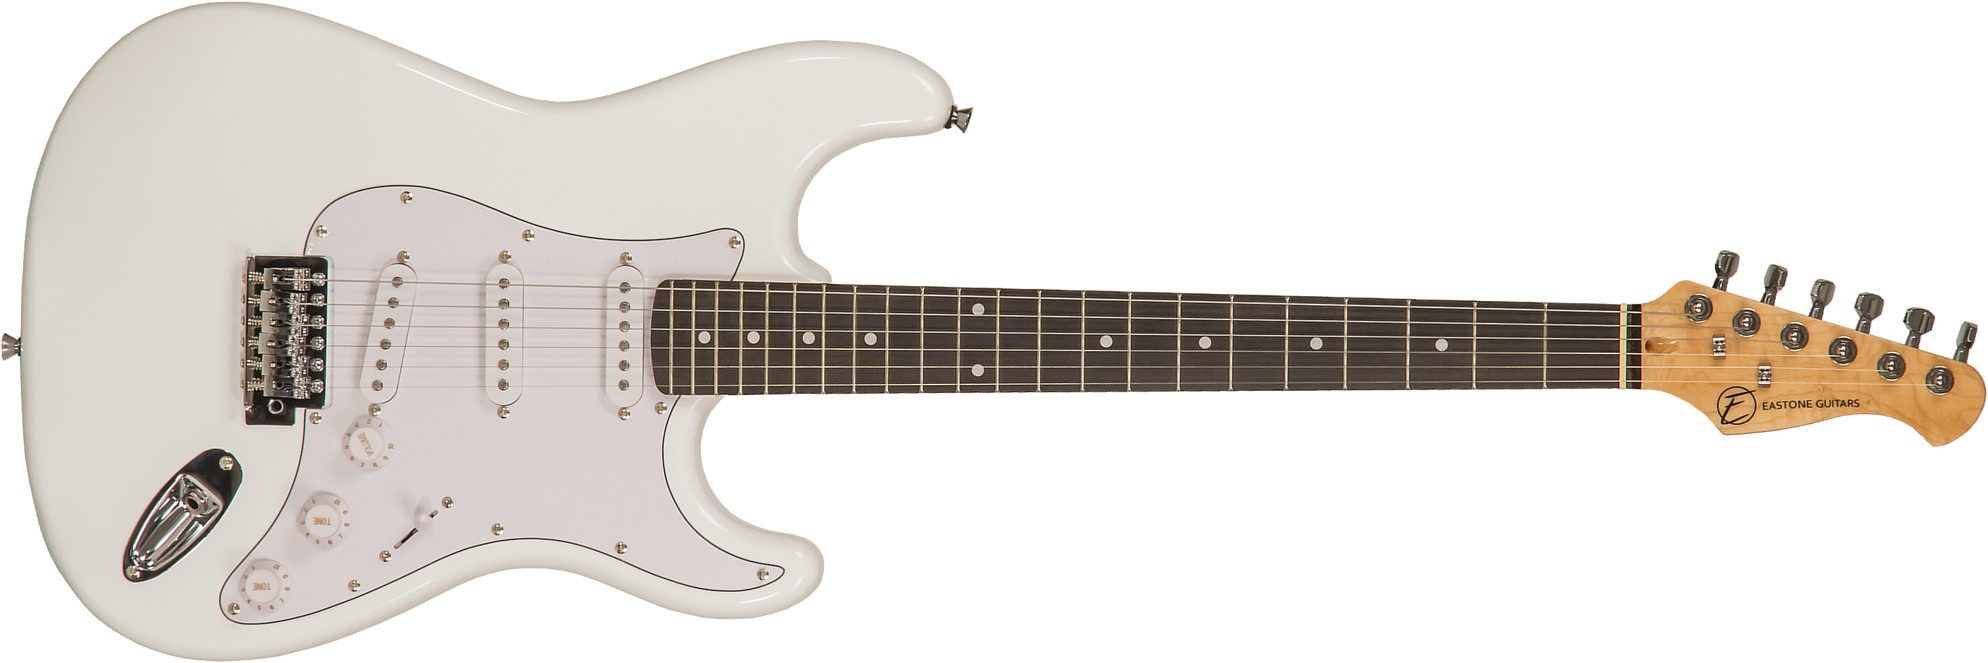 Eastone Str70 3s Trem Pur - Olympic White - Str shape electric guitar - Main picture